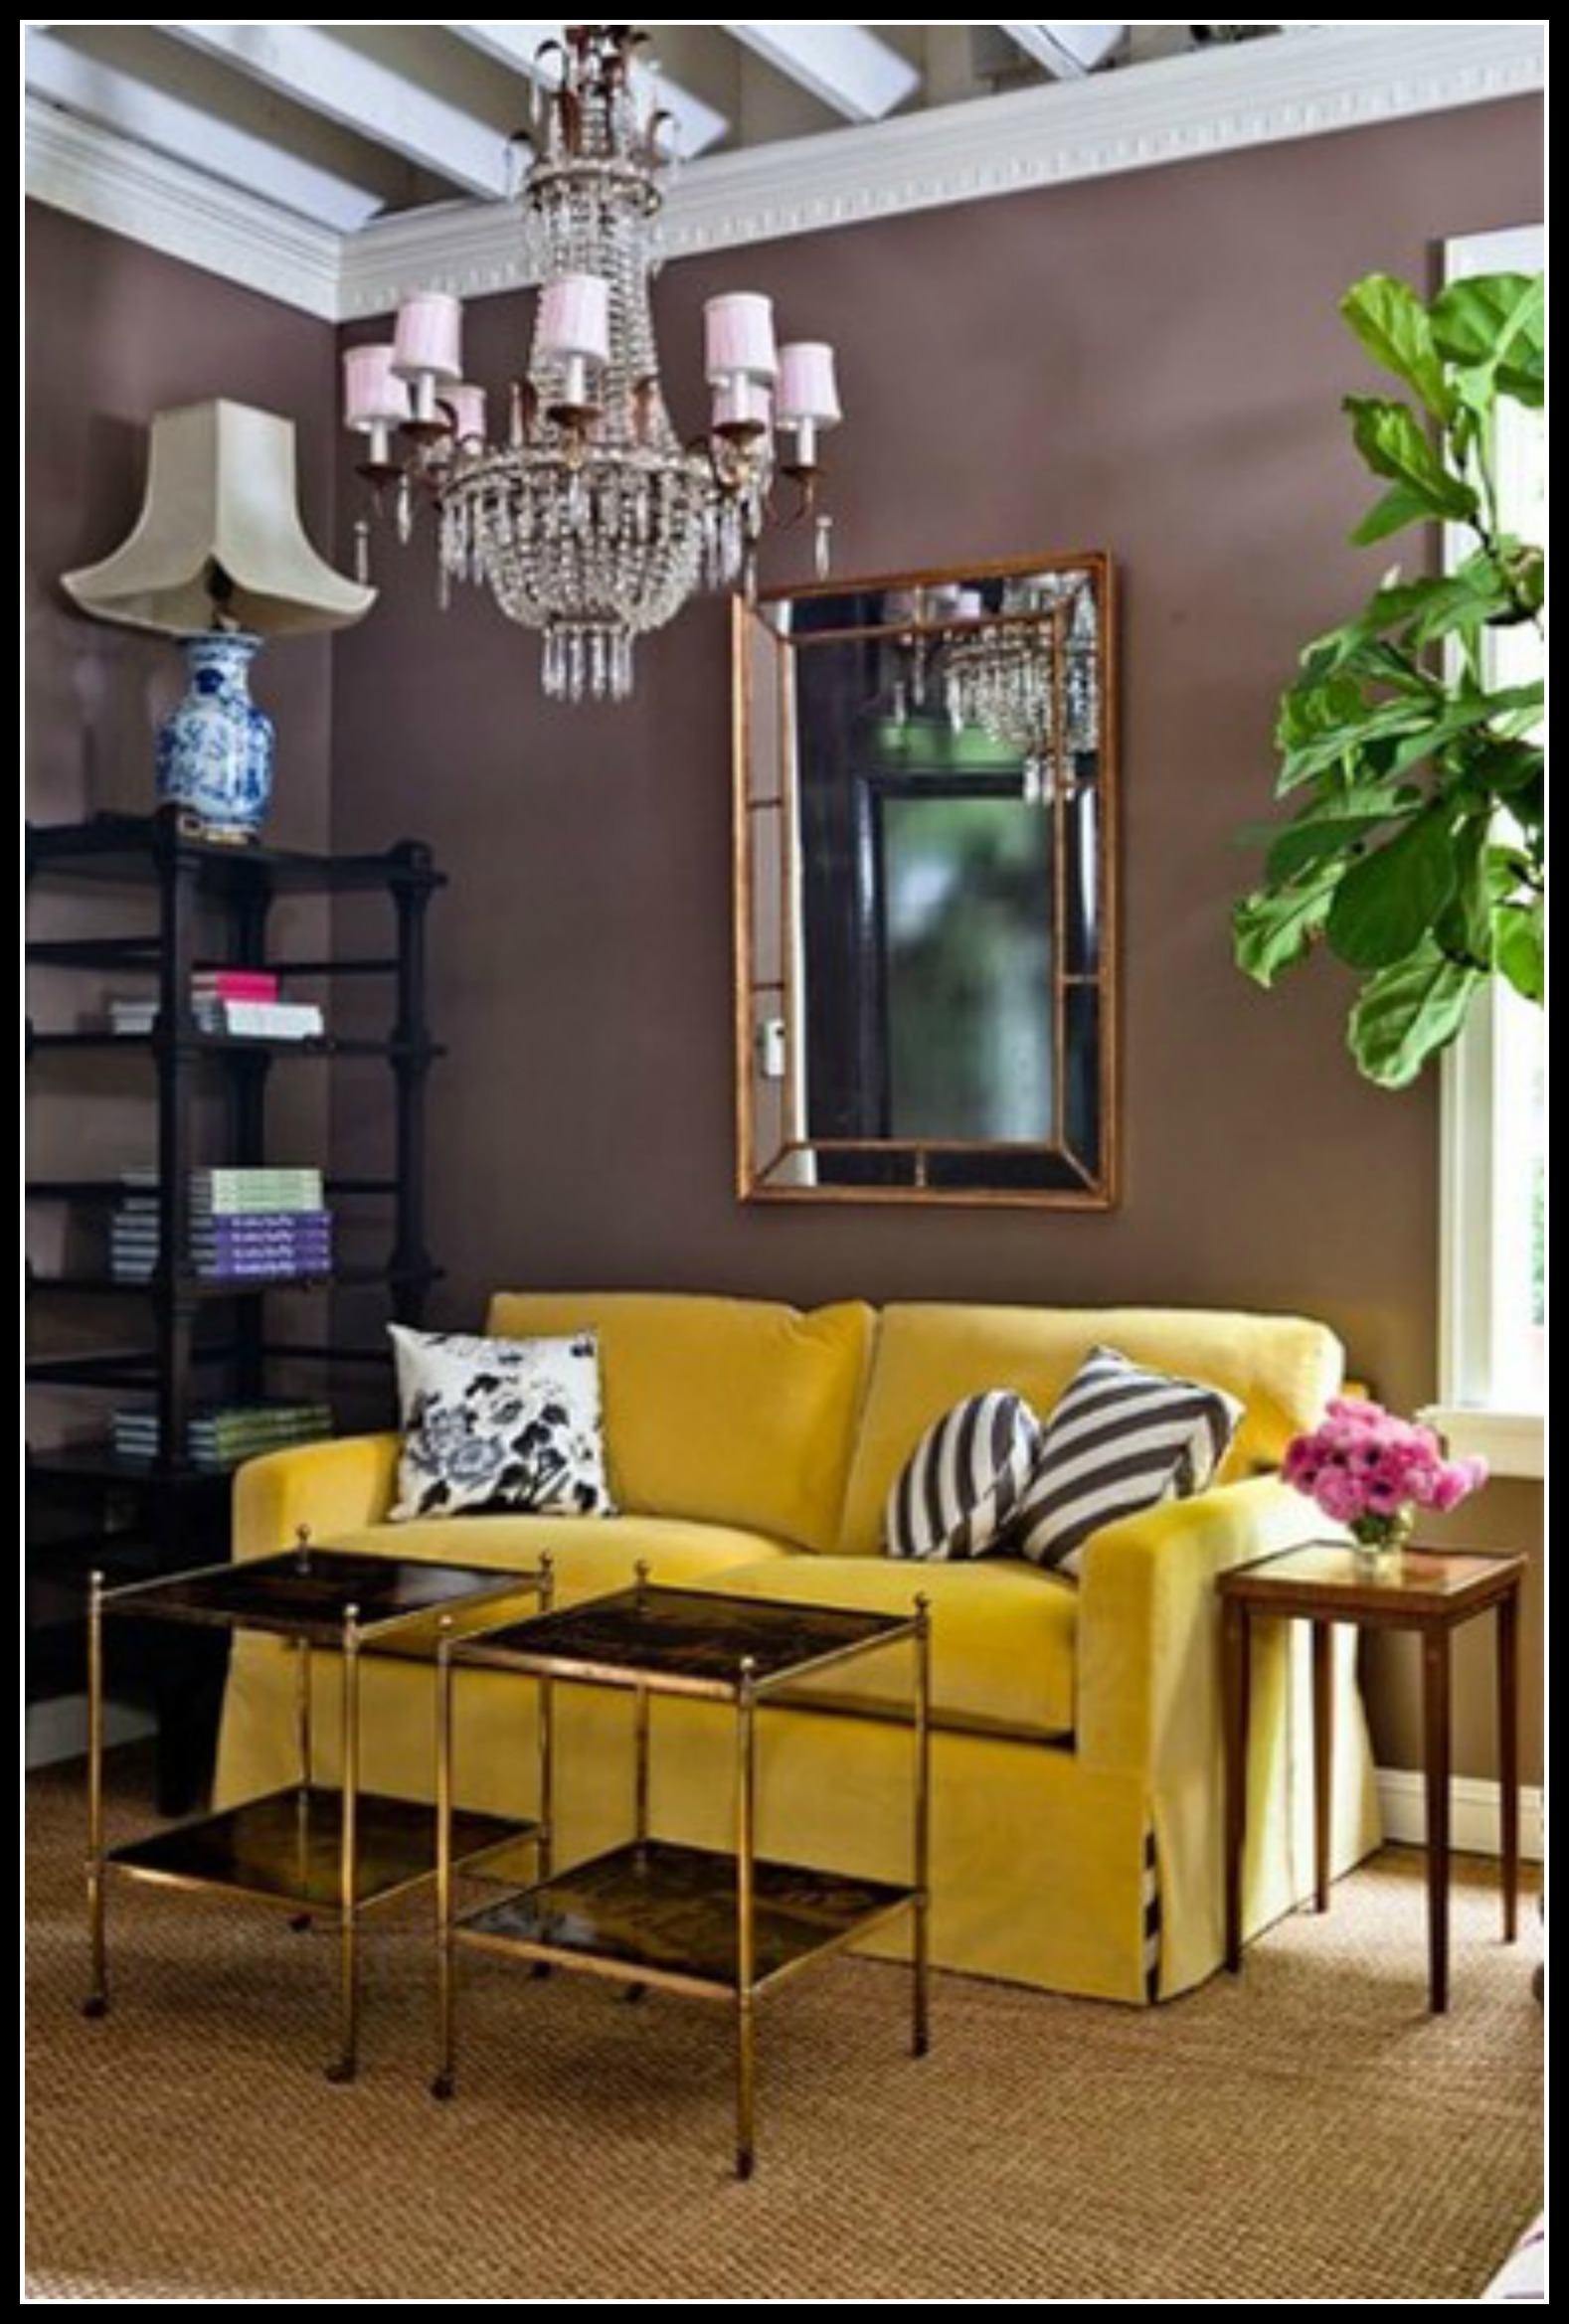 http://courtneyoutloud.files.wordpress.com/2012/03/yellow-couch-and-grey-wall-edited.jpg